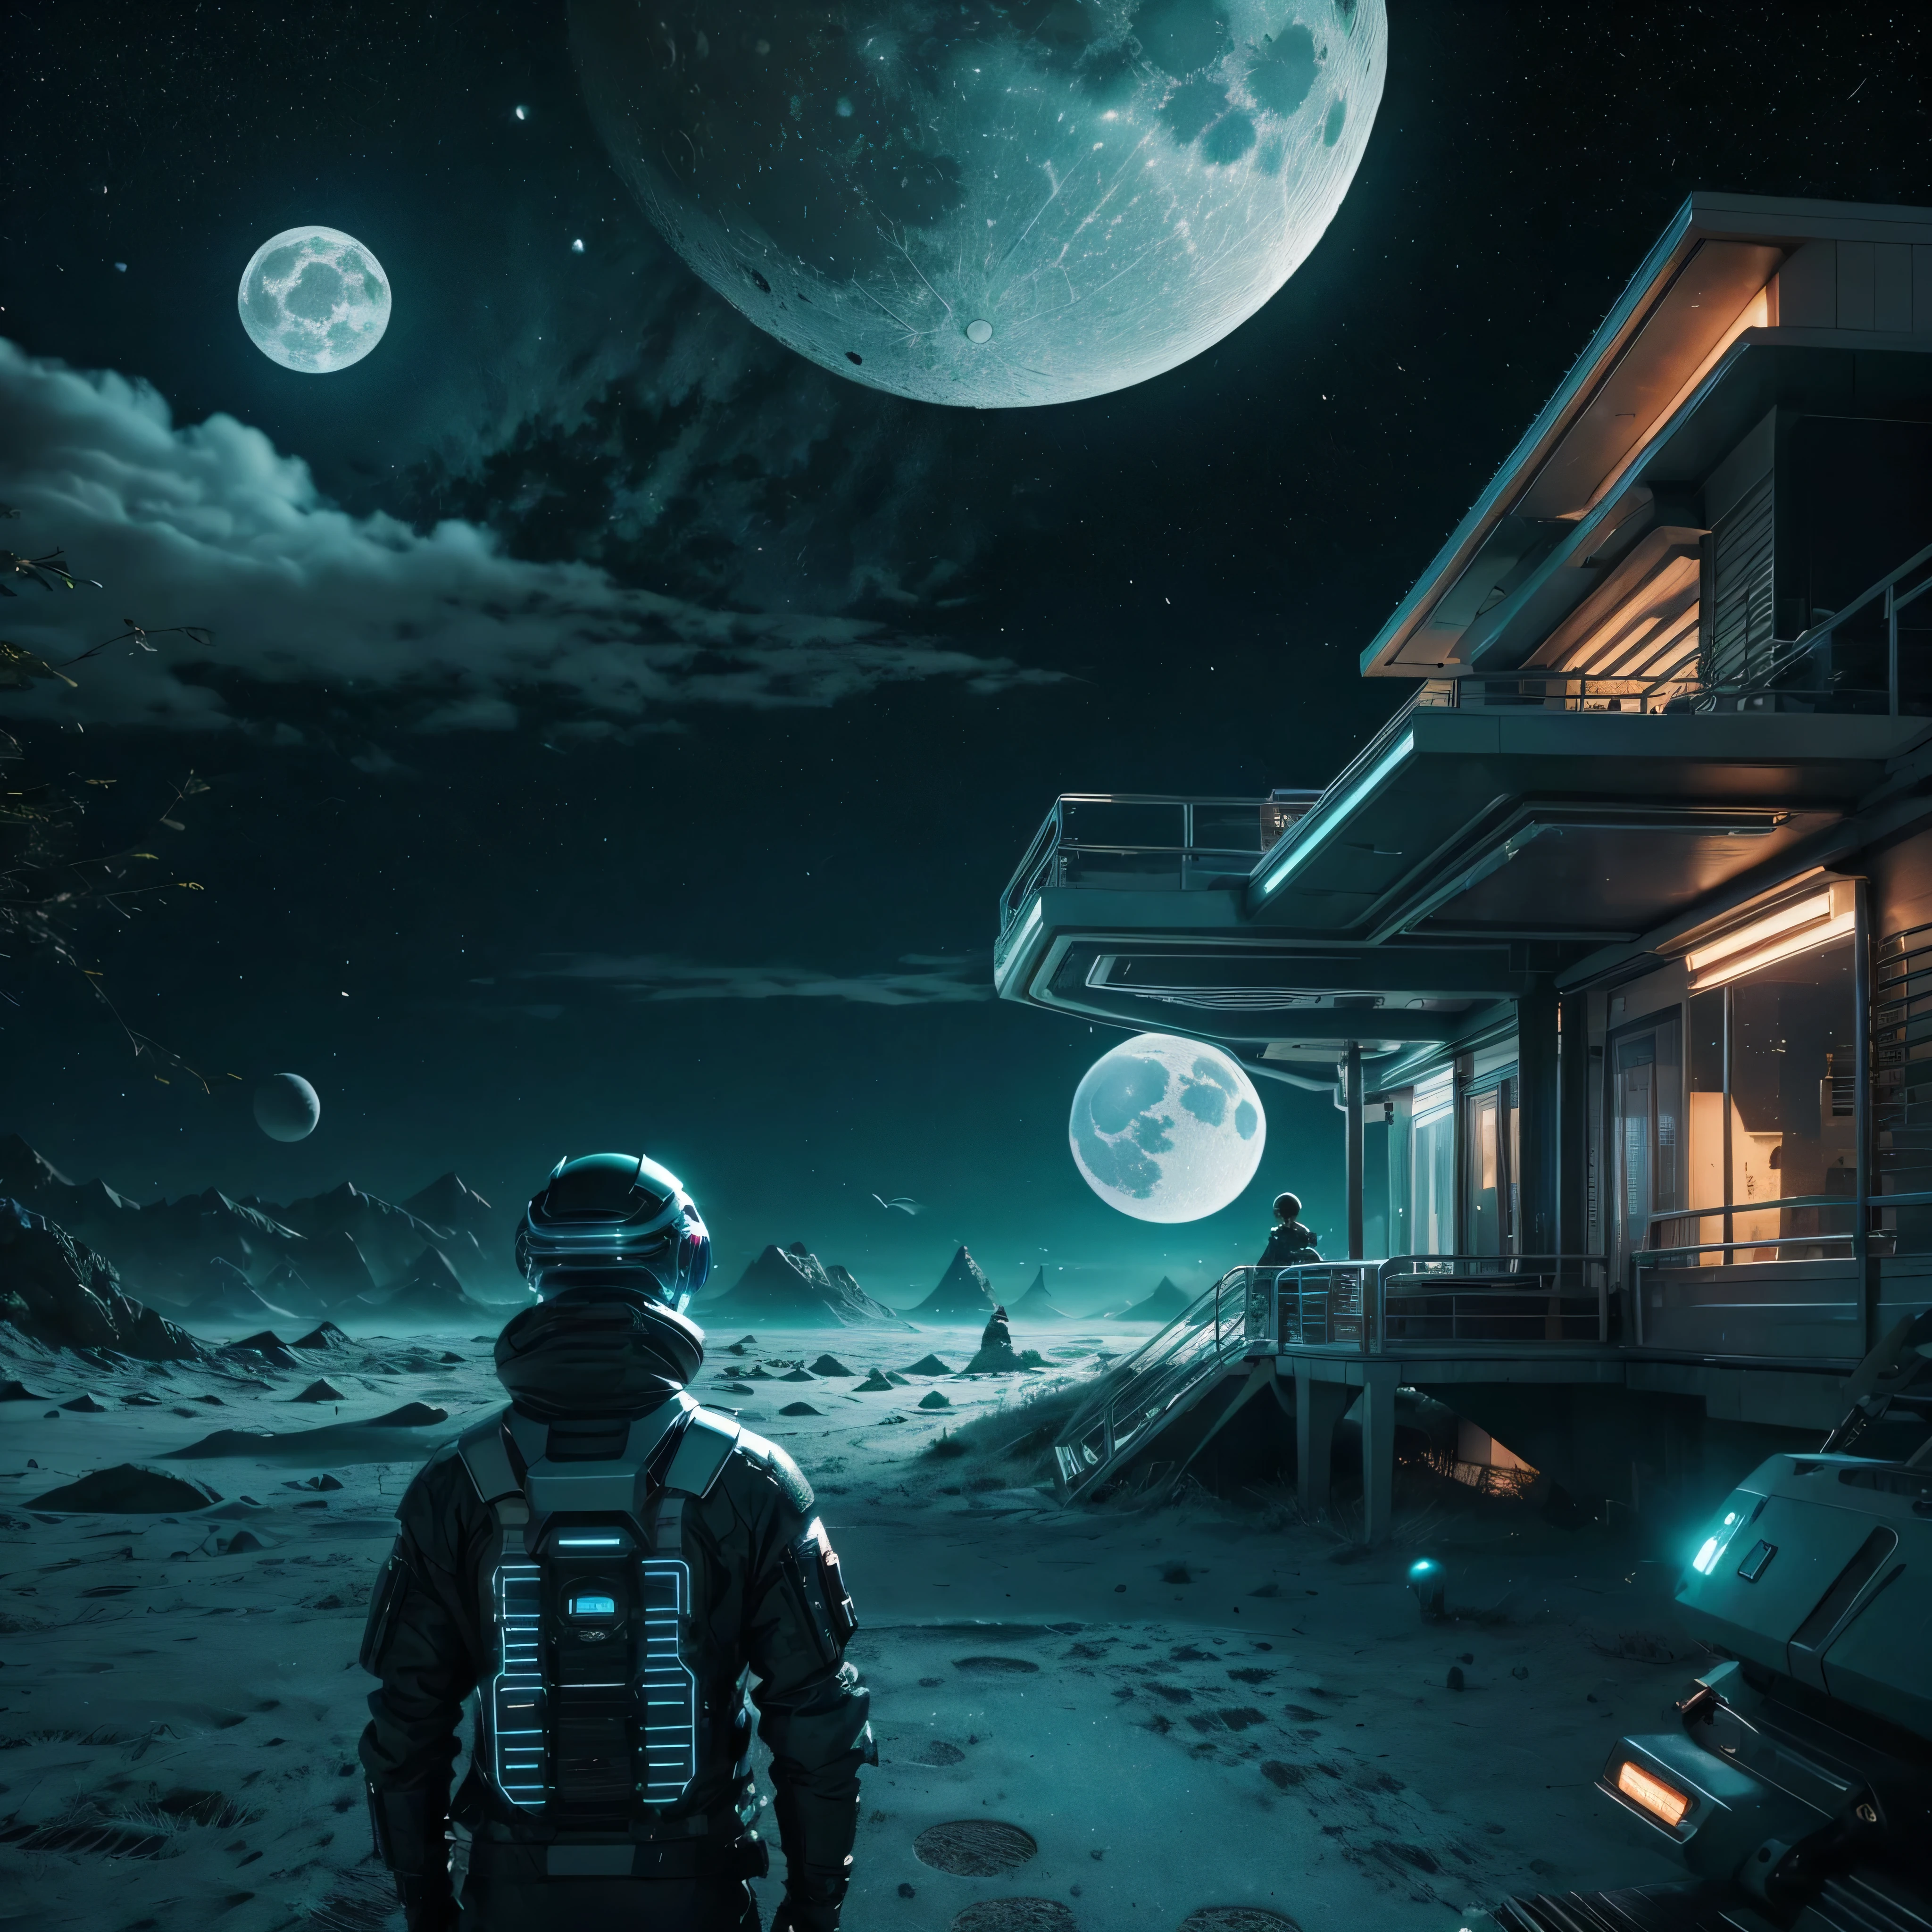 
Futuristic environment with the moon in the background. In the image with the following color palettes, #23101C, #772B32, #835C97, #9291A3, #D0523A. Cinematic, 8k, pixar style 3D, high quality